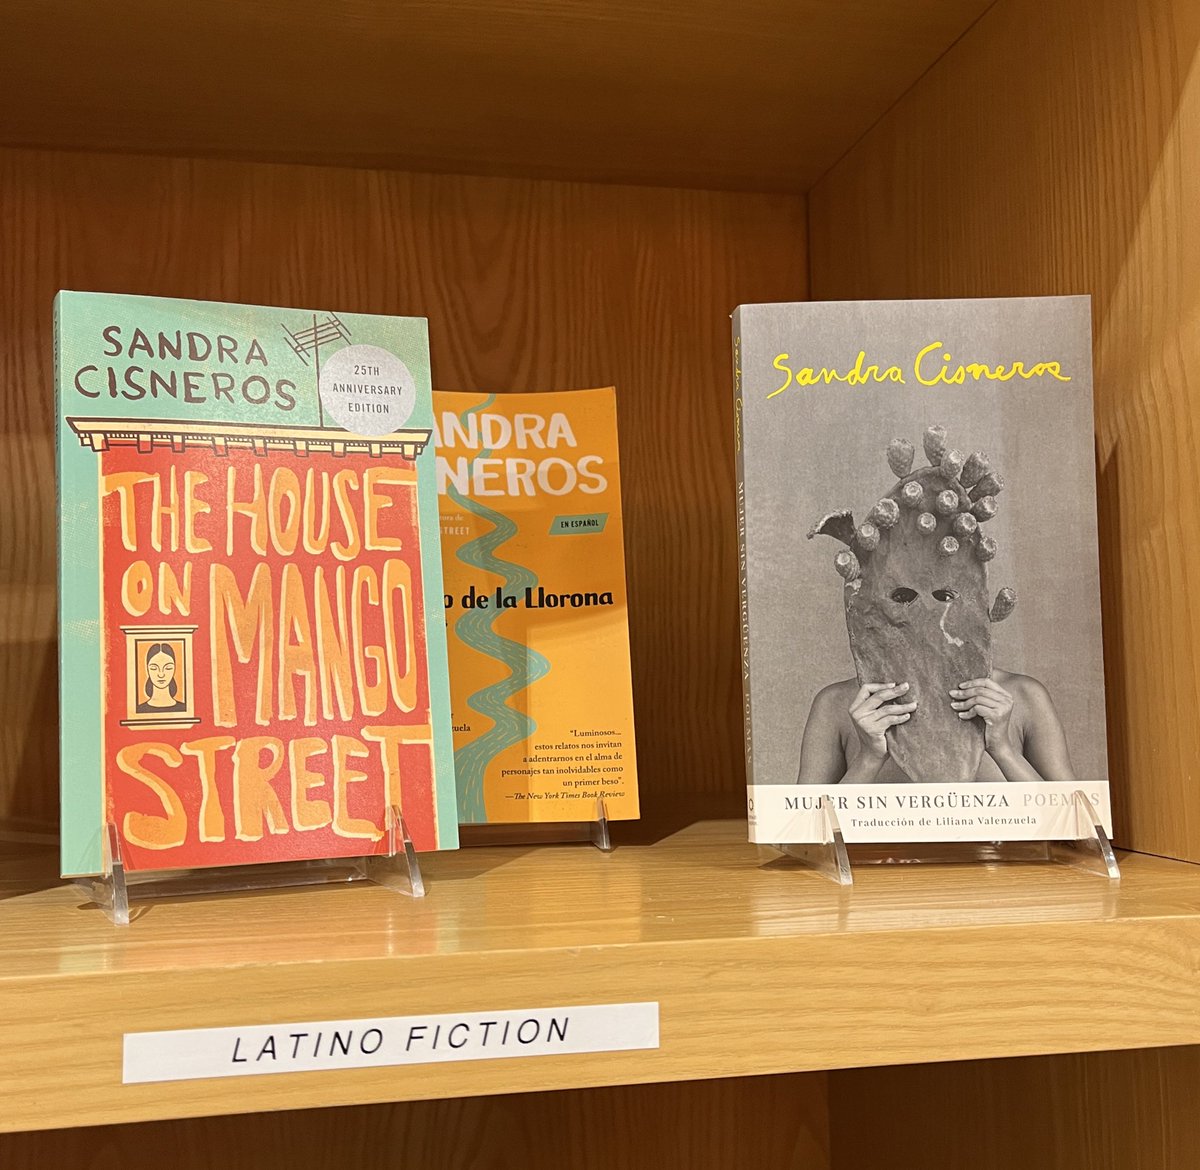 #MuseumMile #NYC @TheAfricaCenter @elmuseo @TheRealCAchebe #ChinuaAchebe #SandraCisneros #Books